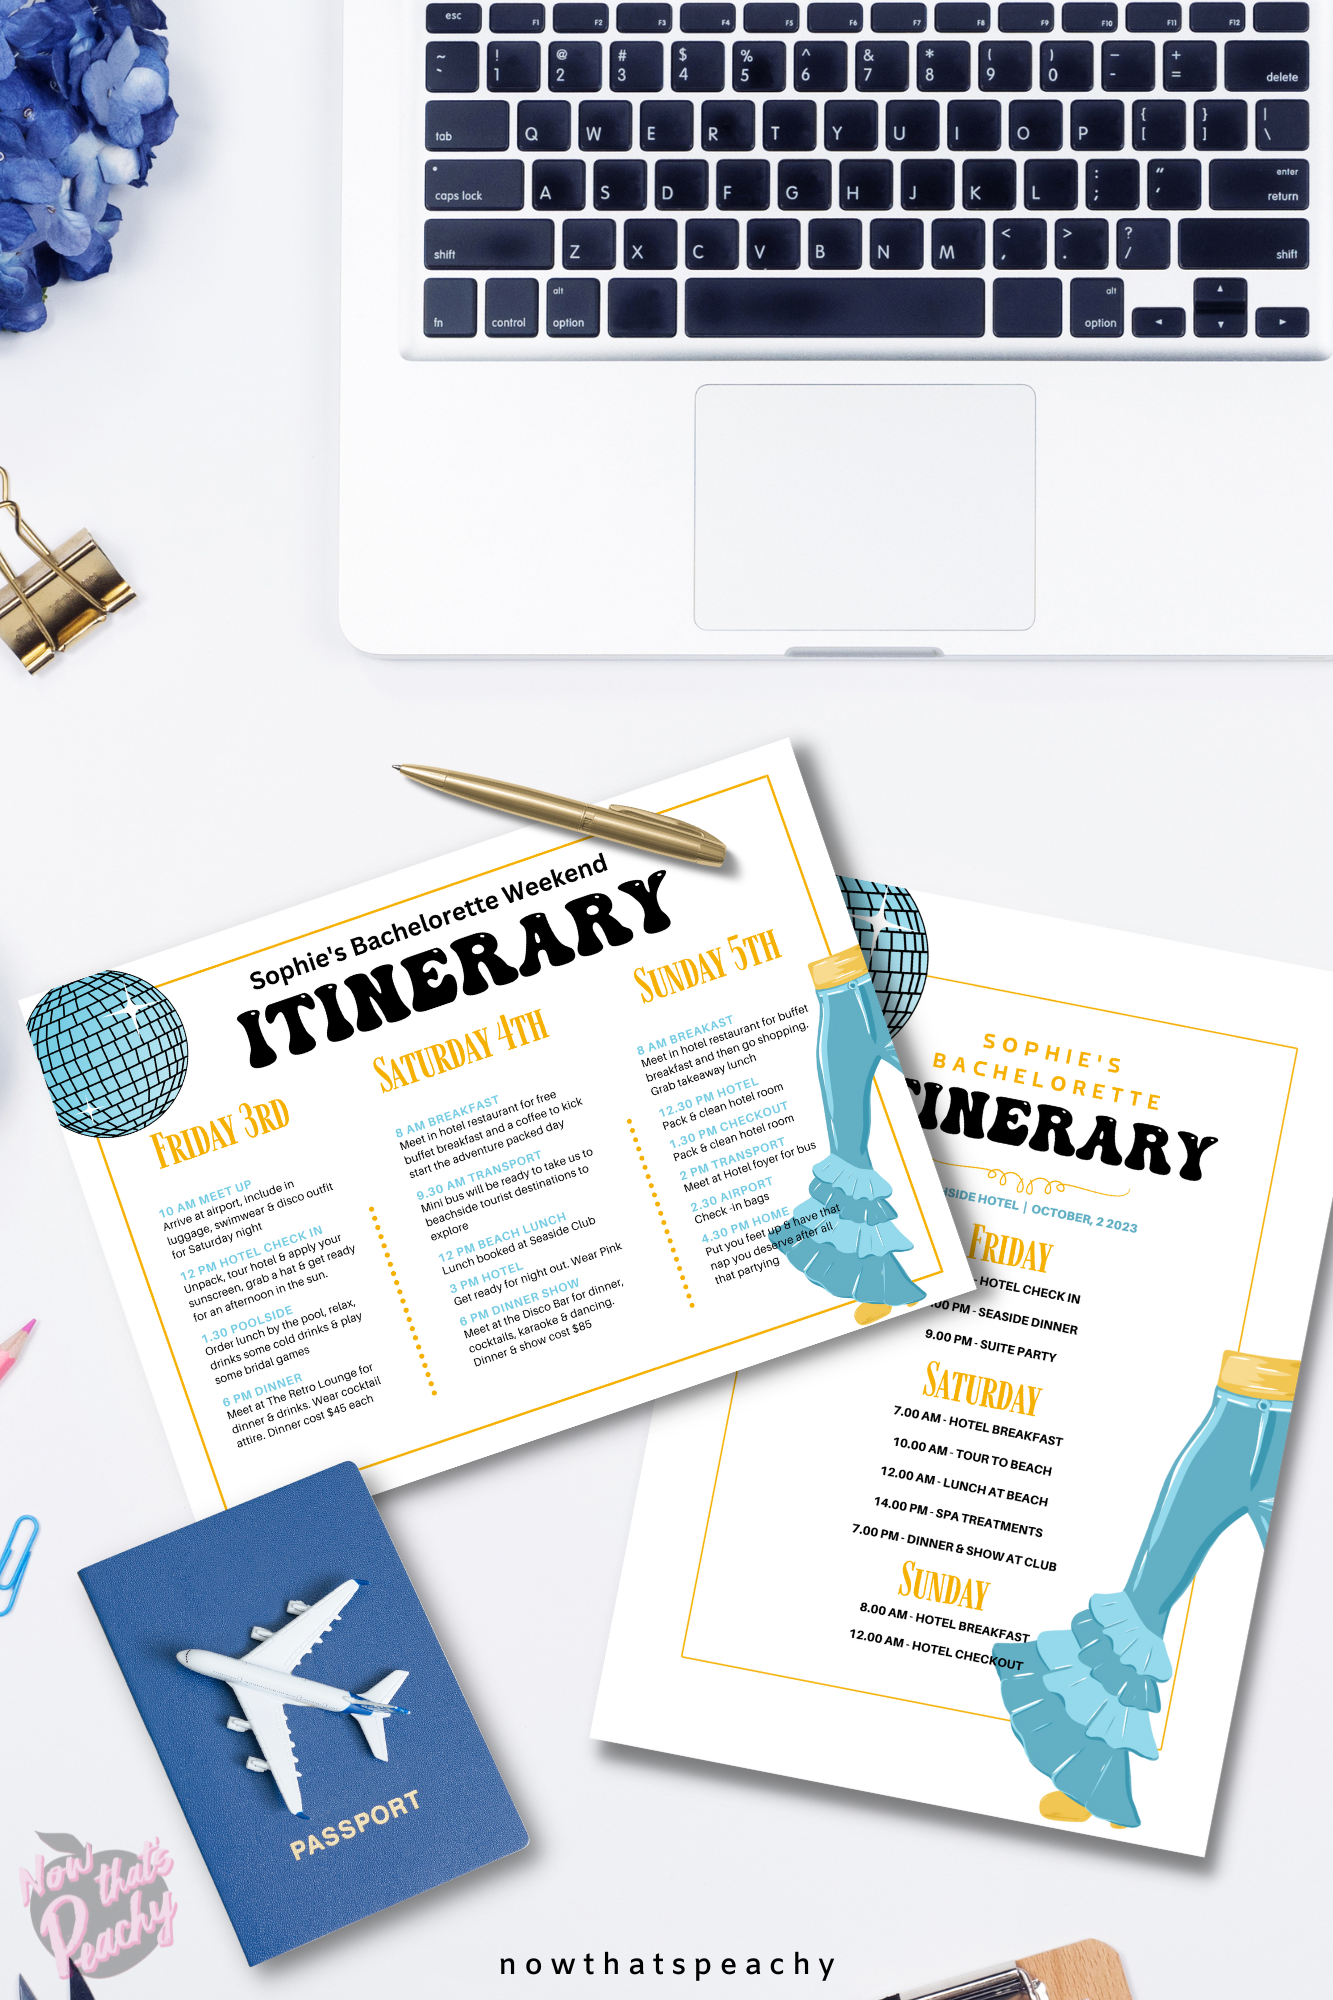 Mamma Mia itinerary getaway 1970s flared denim pants seventies 70's disco ball microphone karaoke studio 54 editable canva printable template digital instant download edit sophie Donna and the dynamos invite edit custom musical movie design gold blue white modern color fun themed bachelorette event 